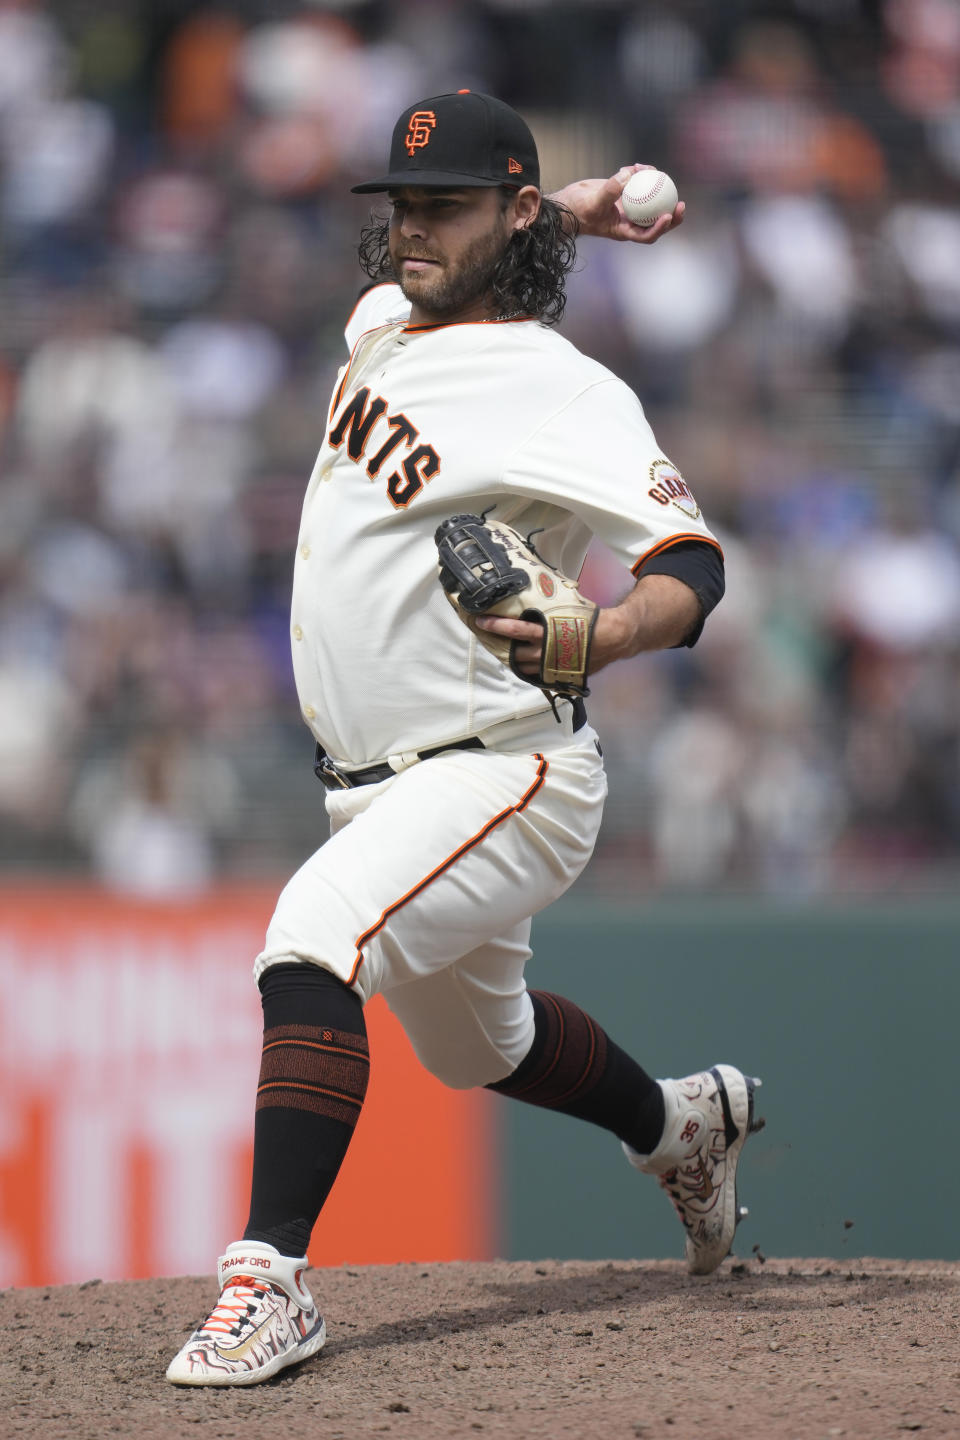 San Francisco Giants position player Brandon Crawford pitches during the ninth inning of a baseball game against the Chicago Cubs in San Francisco, Sunday, June 11, 2023. (AP Photo/Jeff Chiu)